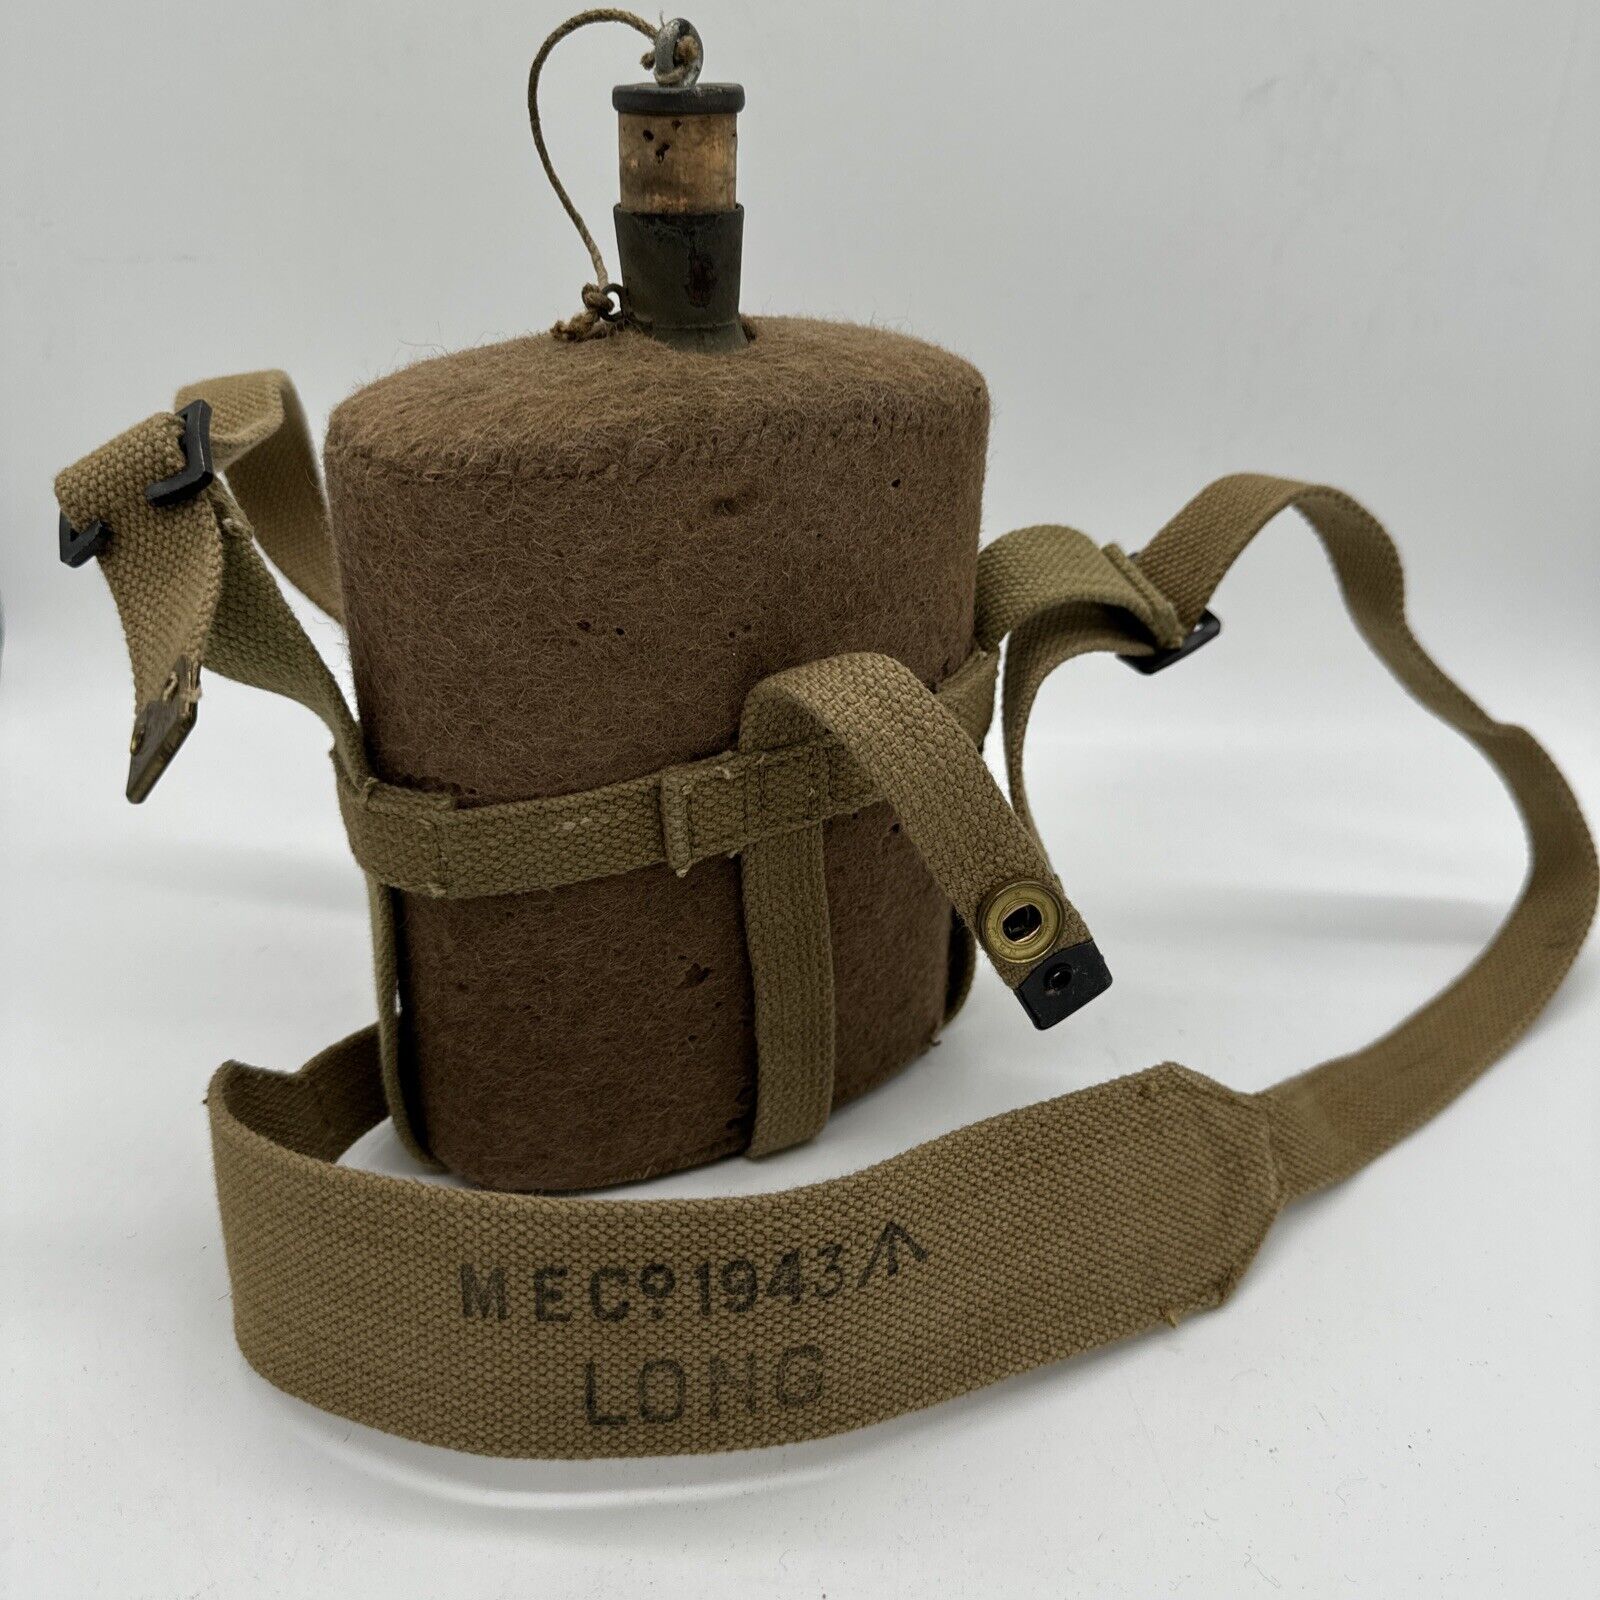 VTG WW2 BRITISH ARMY MILITARY WEBBING WOOL P37 WATER CANTEEN FLASK WITH CARRIER